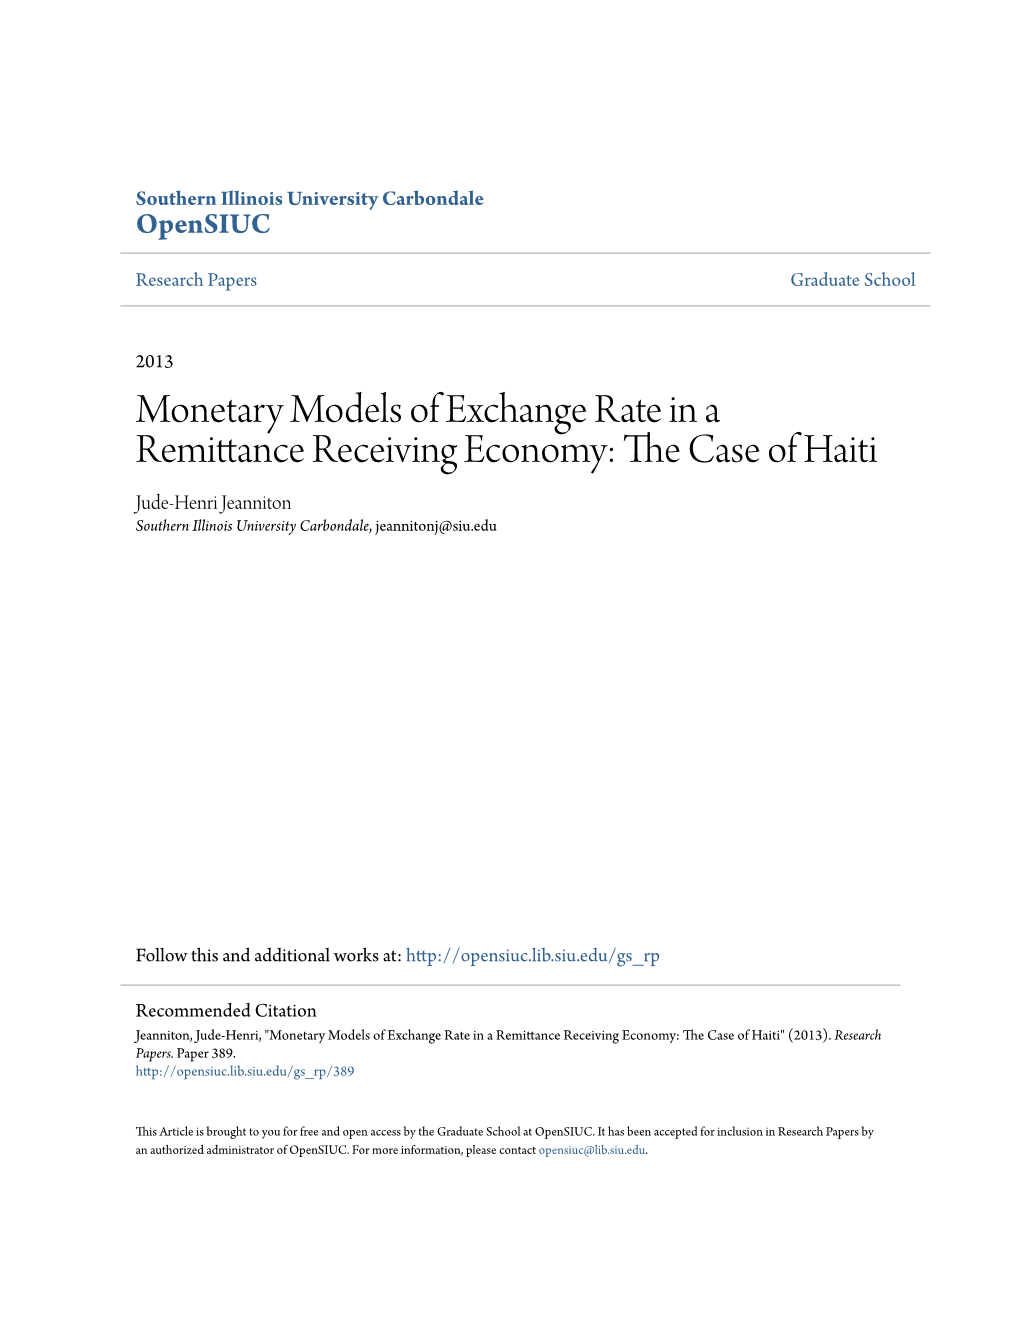 Monetary Models of Exchange Rate in a Remittance Receiving Economy